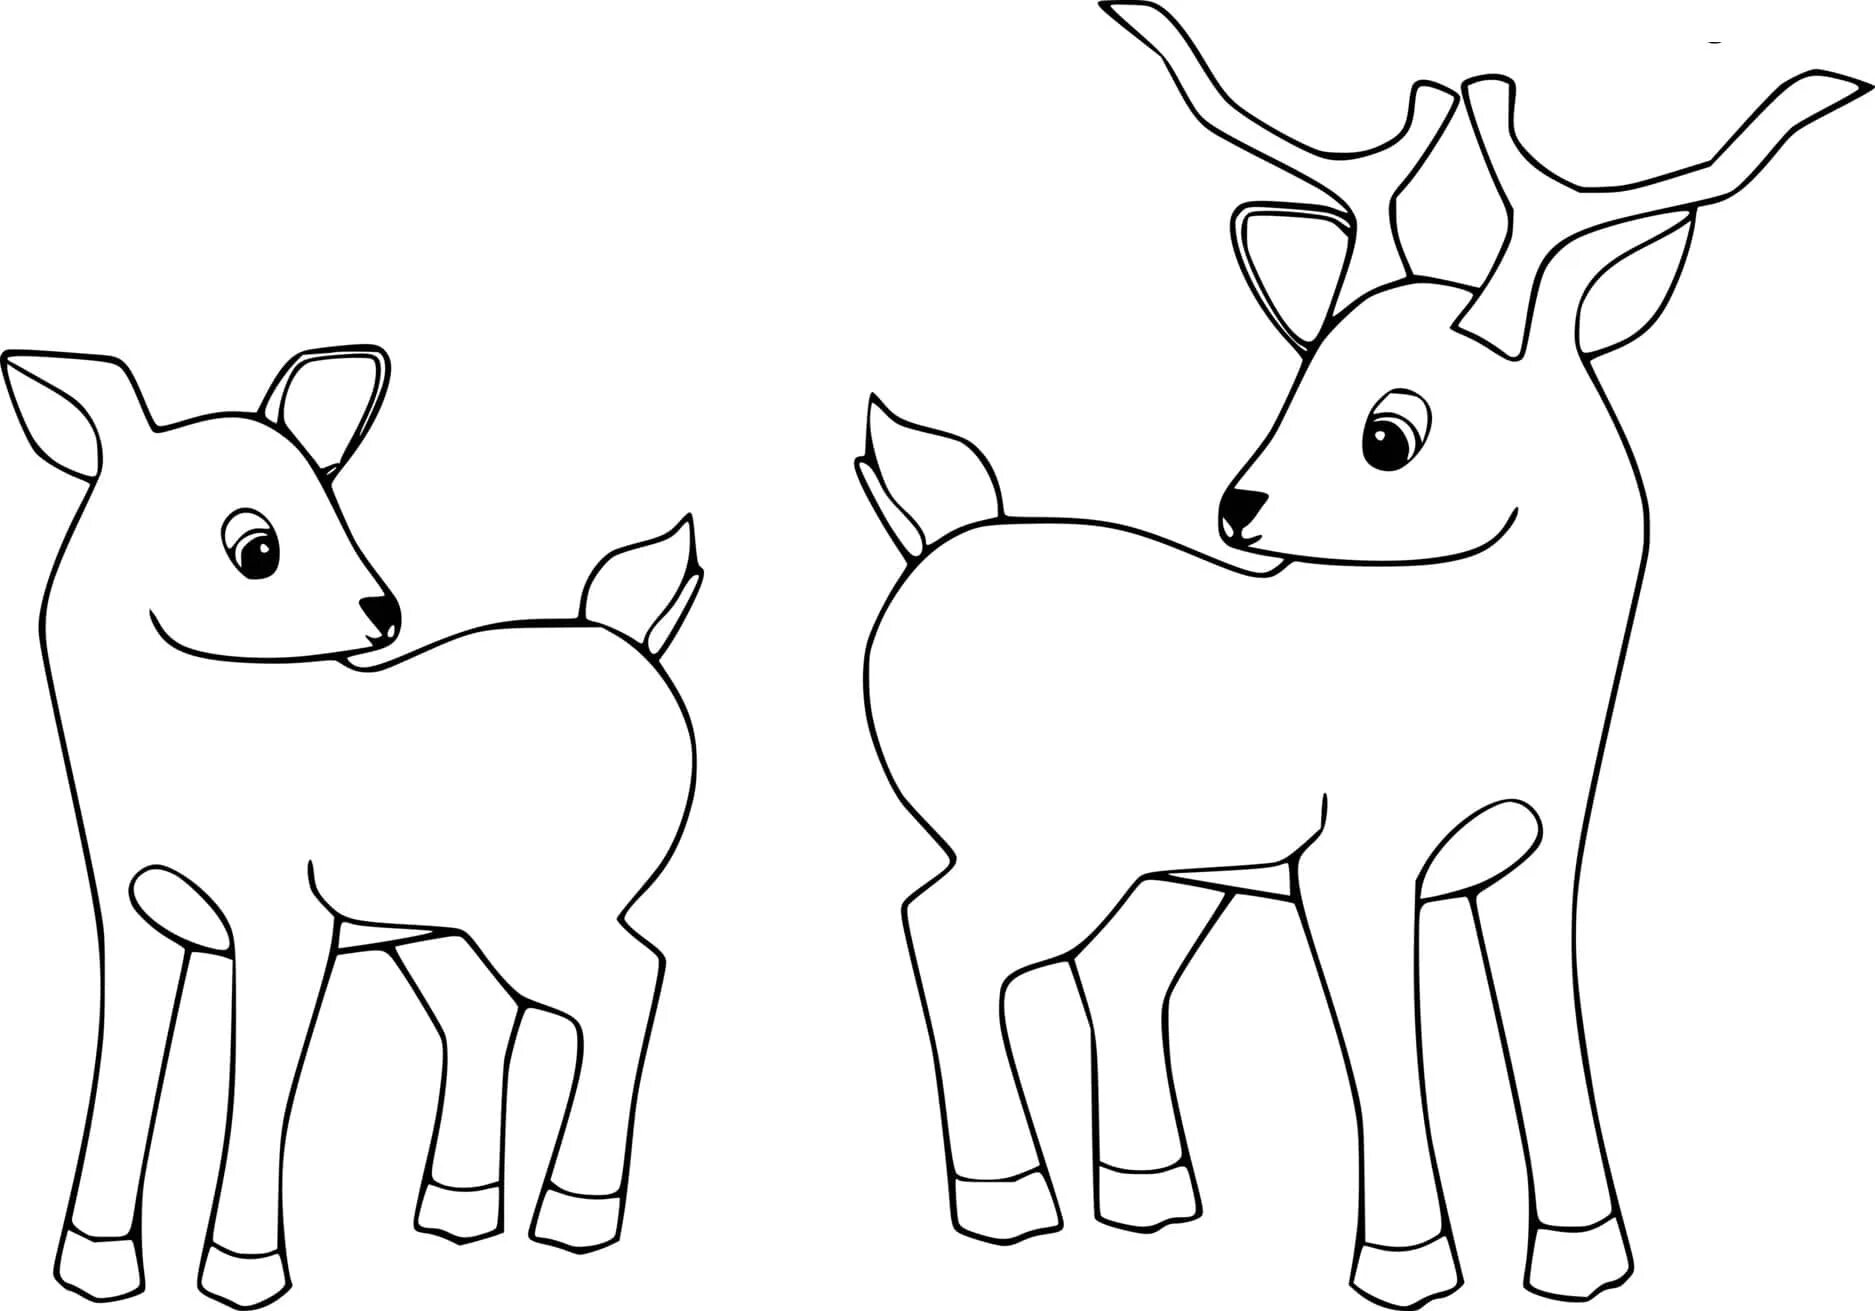 Glowing deer coloring pages for kids 6-7 years old